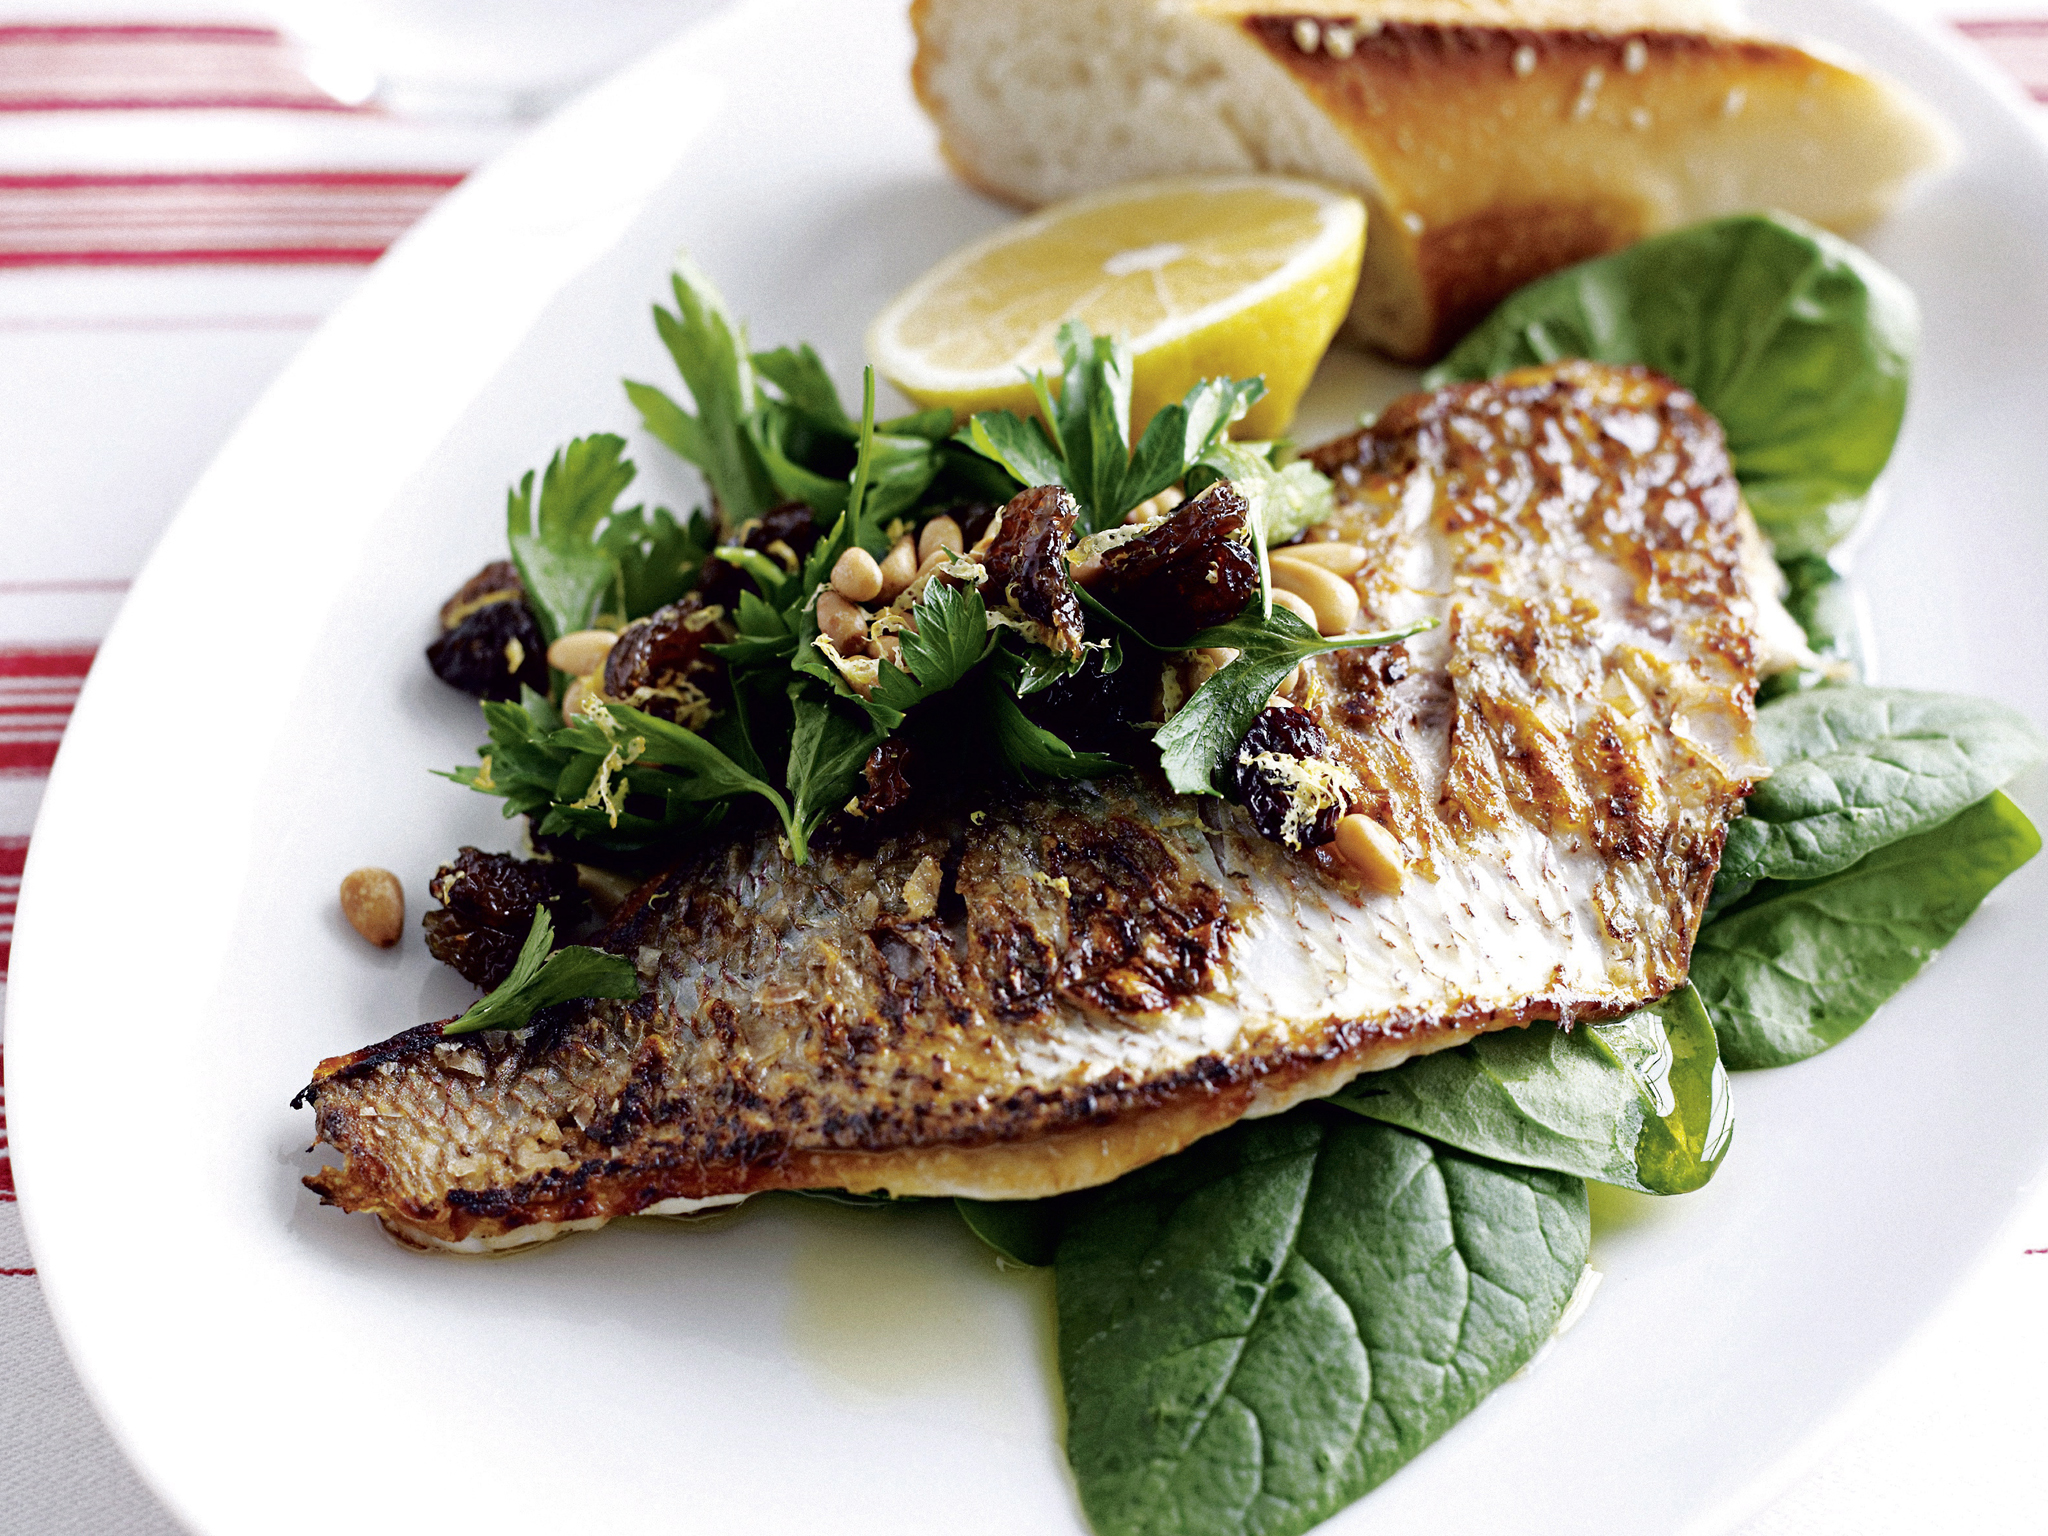 Pan-Fried Fish with Lemon and Spinach Salad